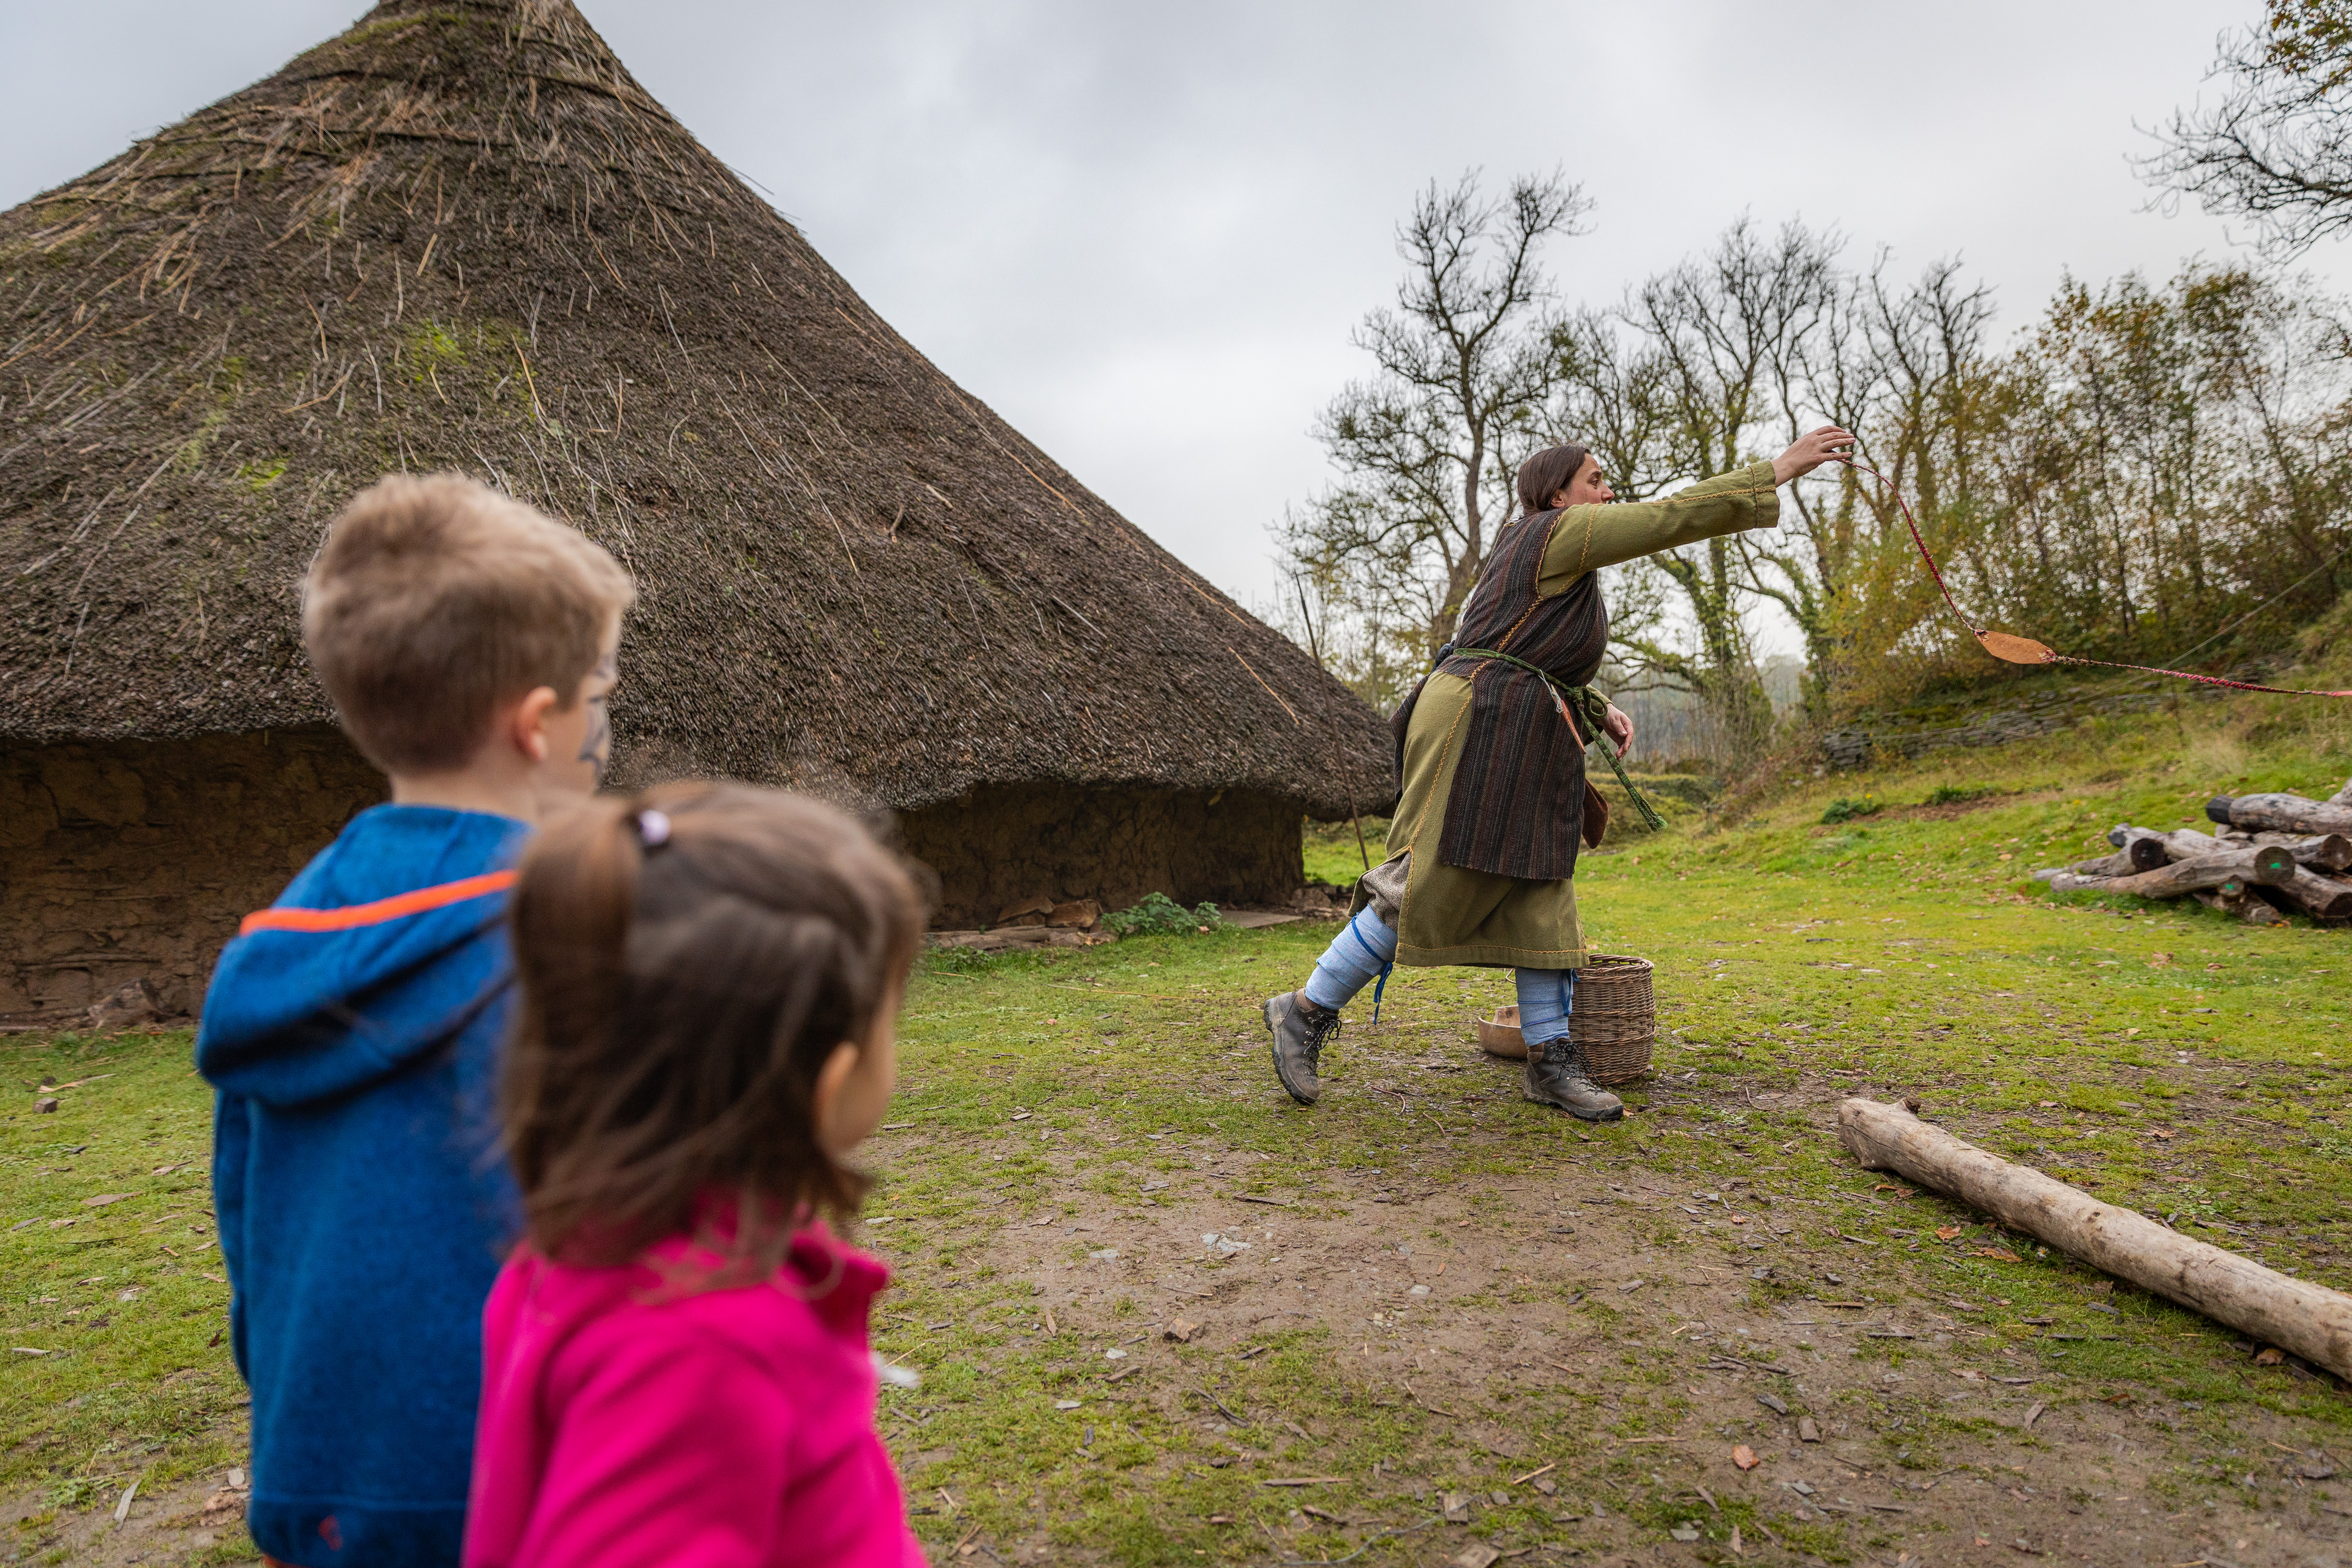 Two children watch a woman in celtic dress fire a traditional slingshot